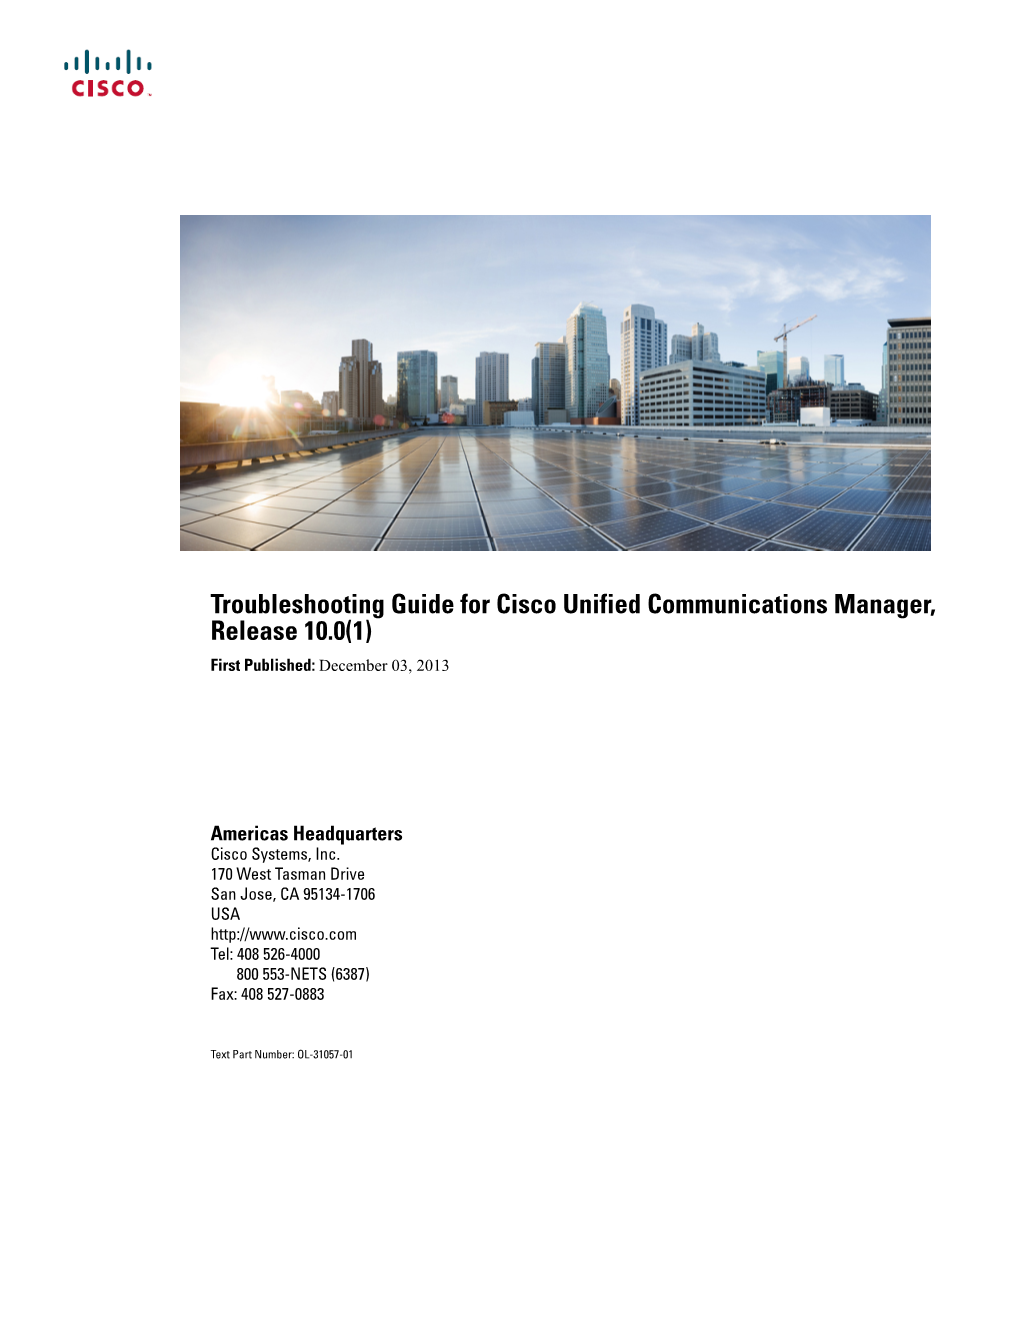 Troubleshooting Guide for Cisco Unified Communications Manager, Release 10.0(1) First Published: December 03, 2013